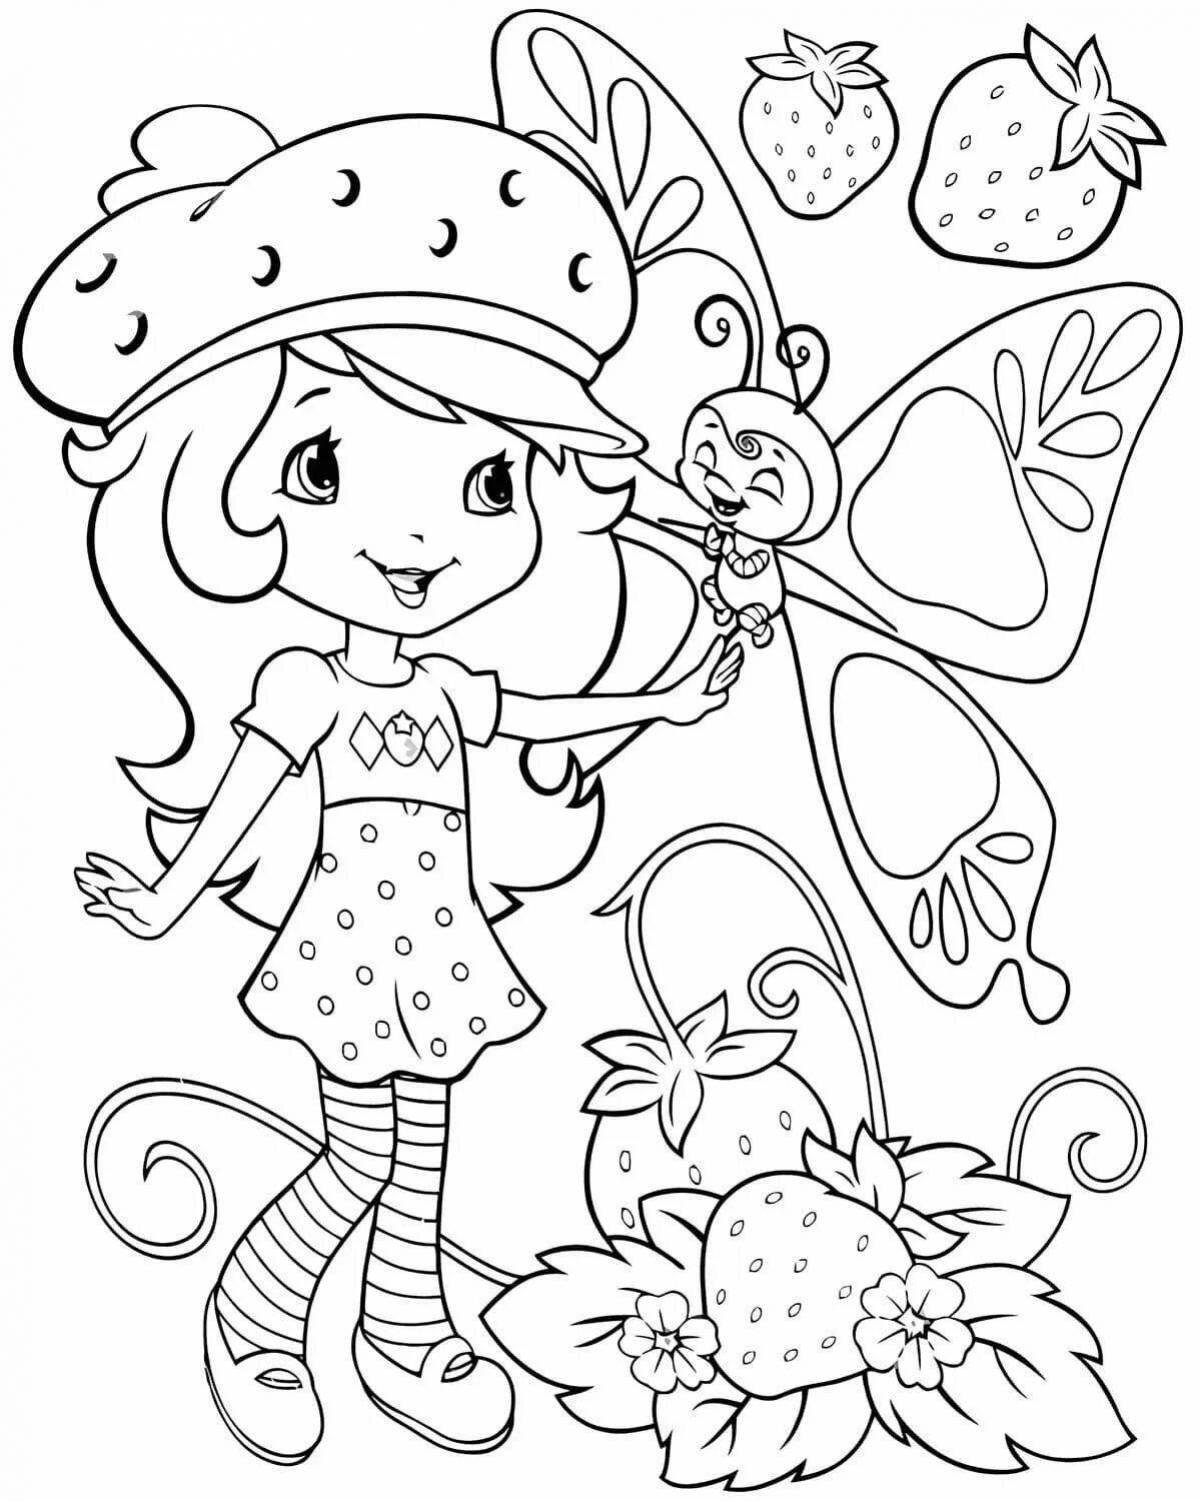 Shiny coloring book for girls